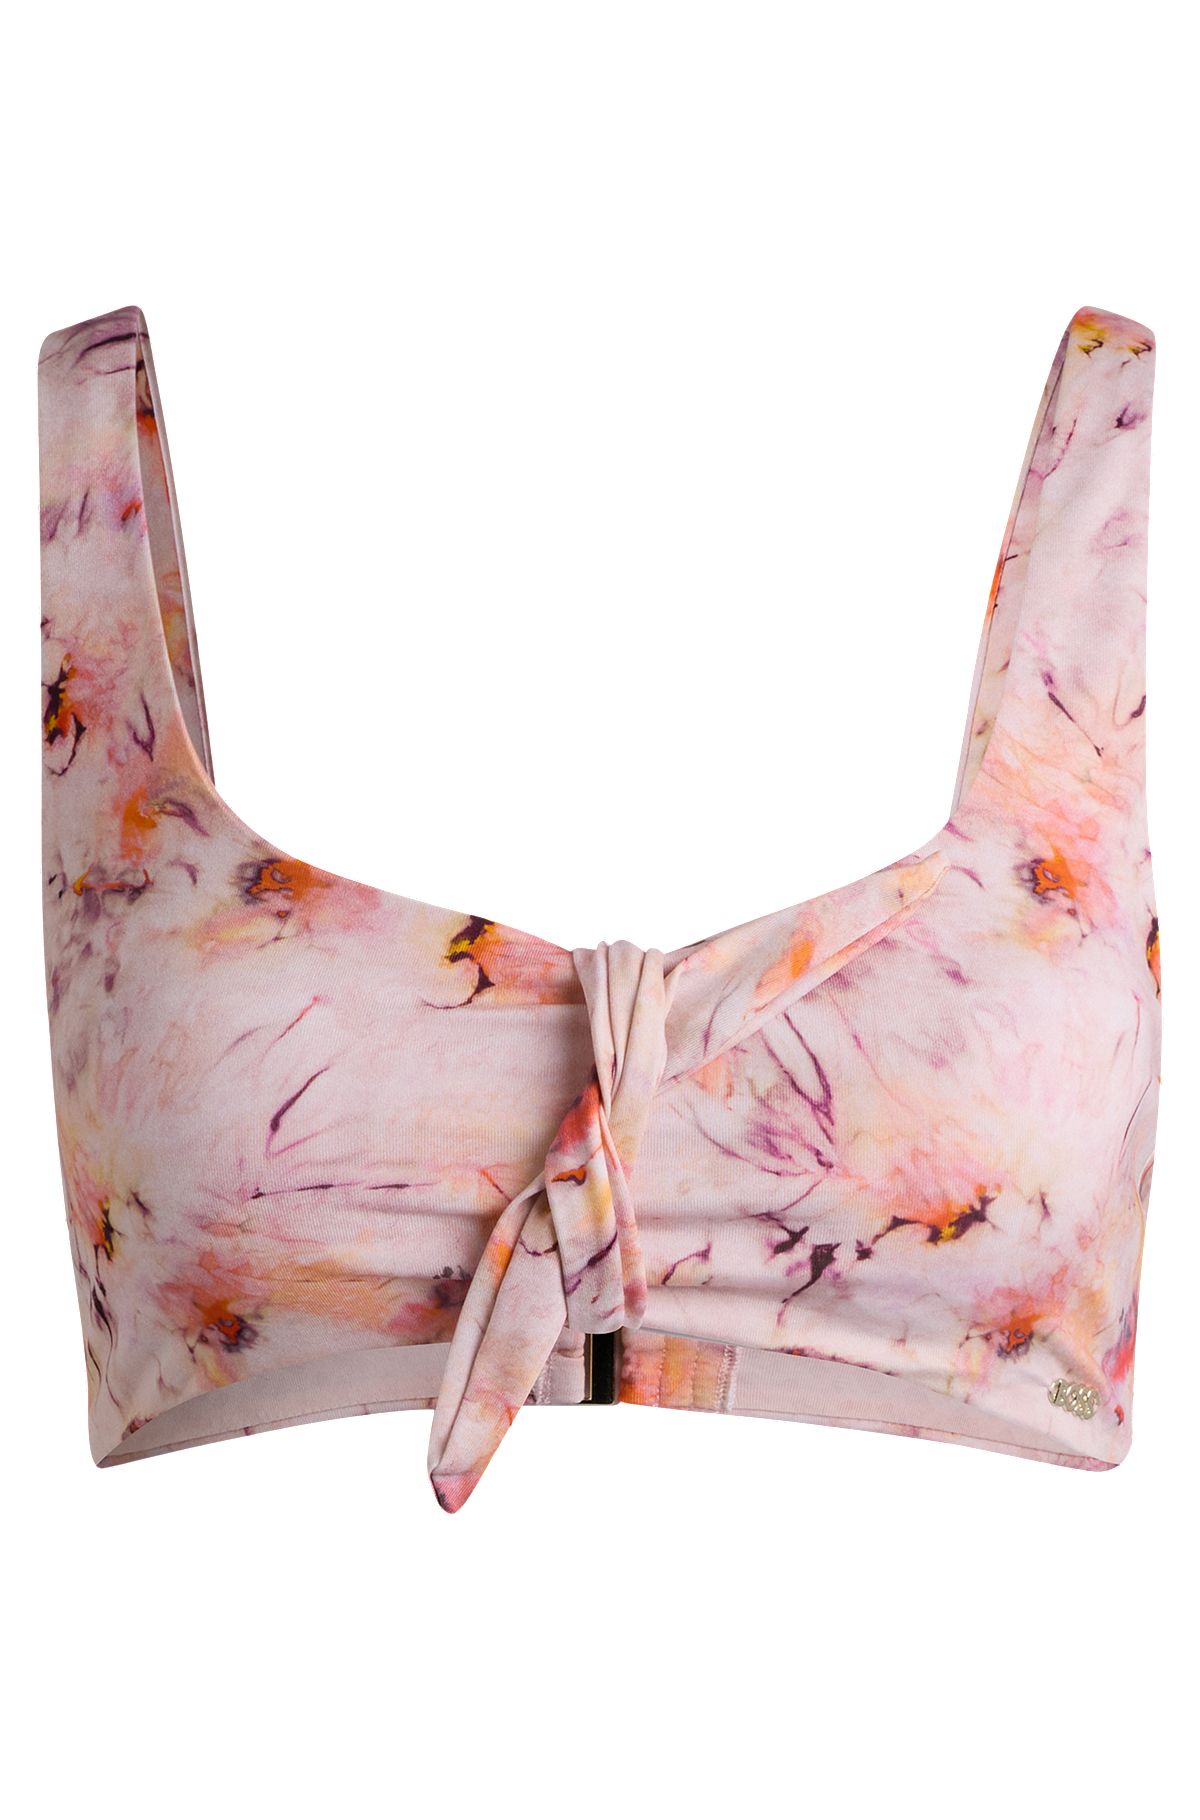 Printed bikini bralette with knot front, Pink Patterned